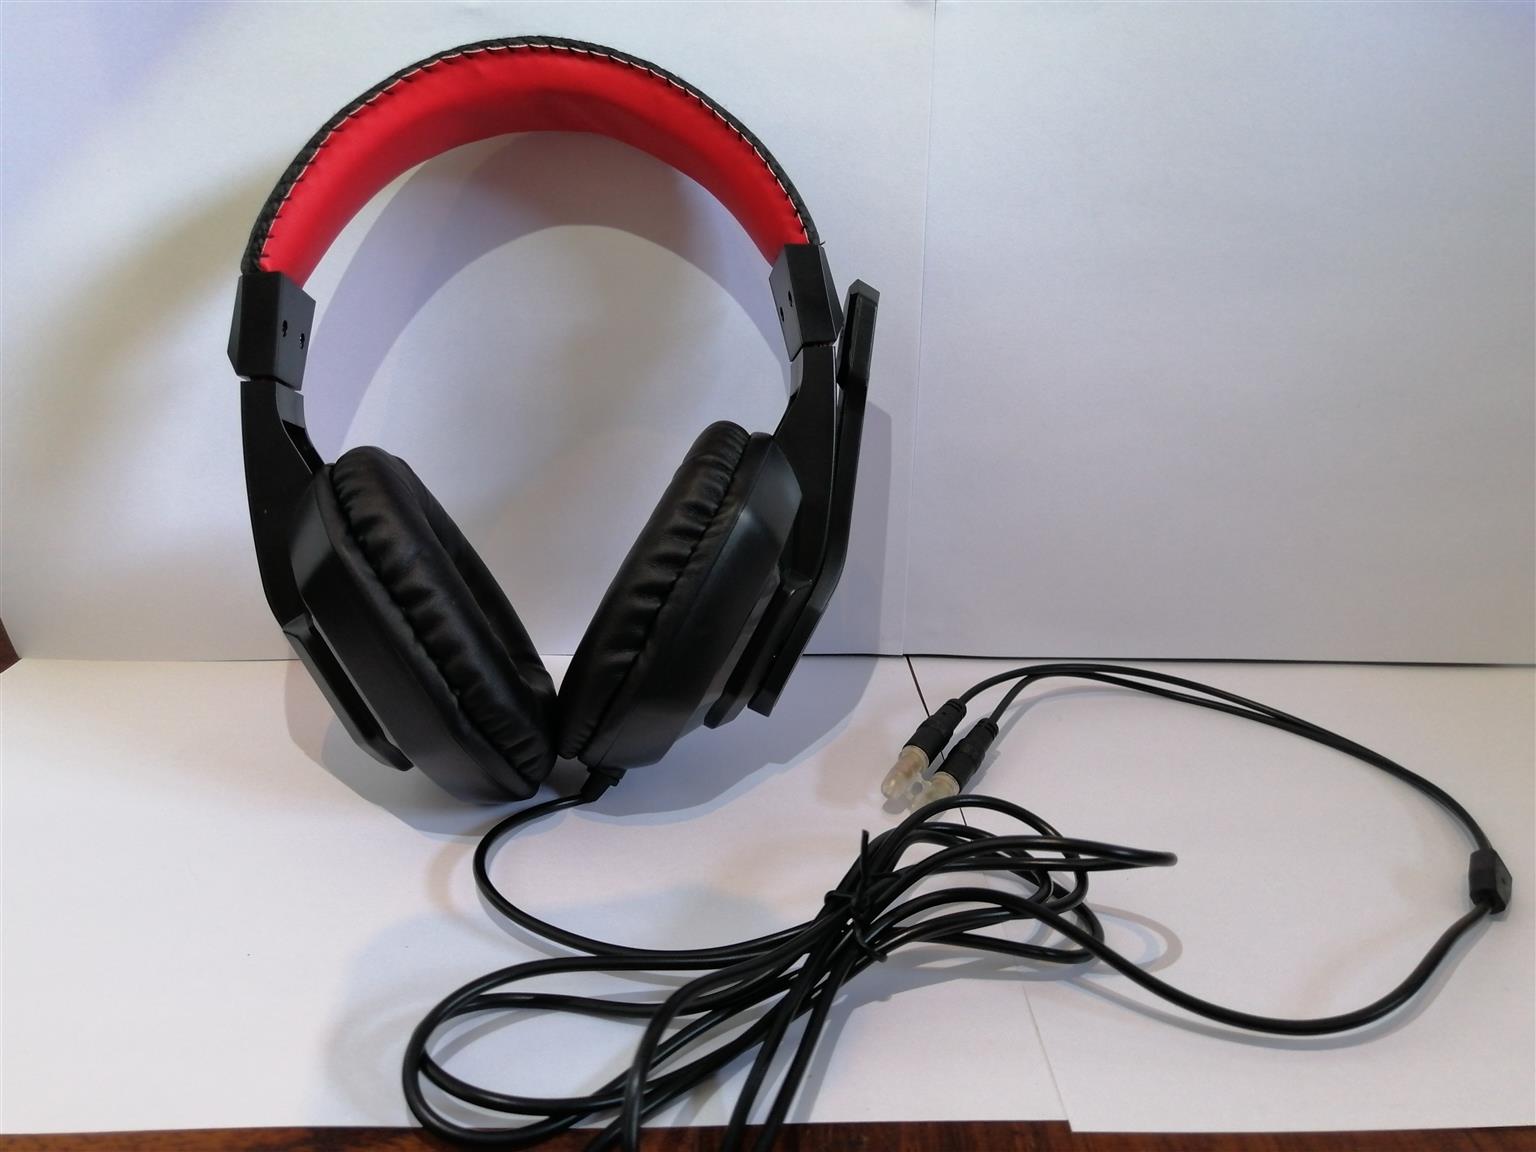 Brand new gaming headset, never used for sale !